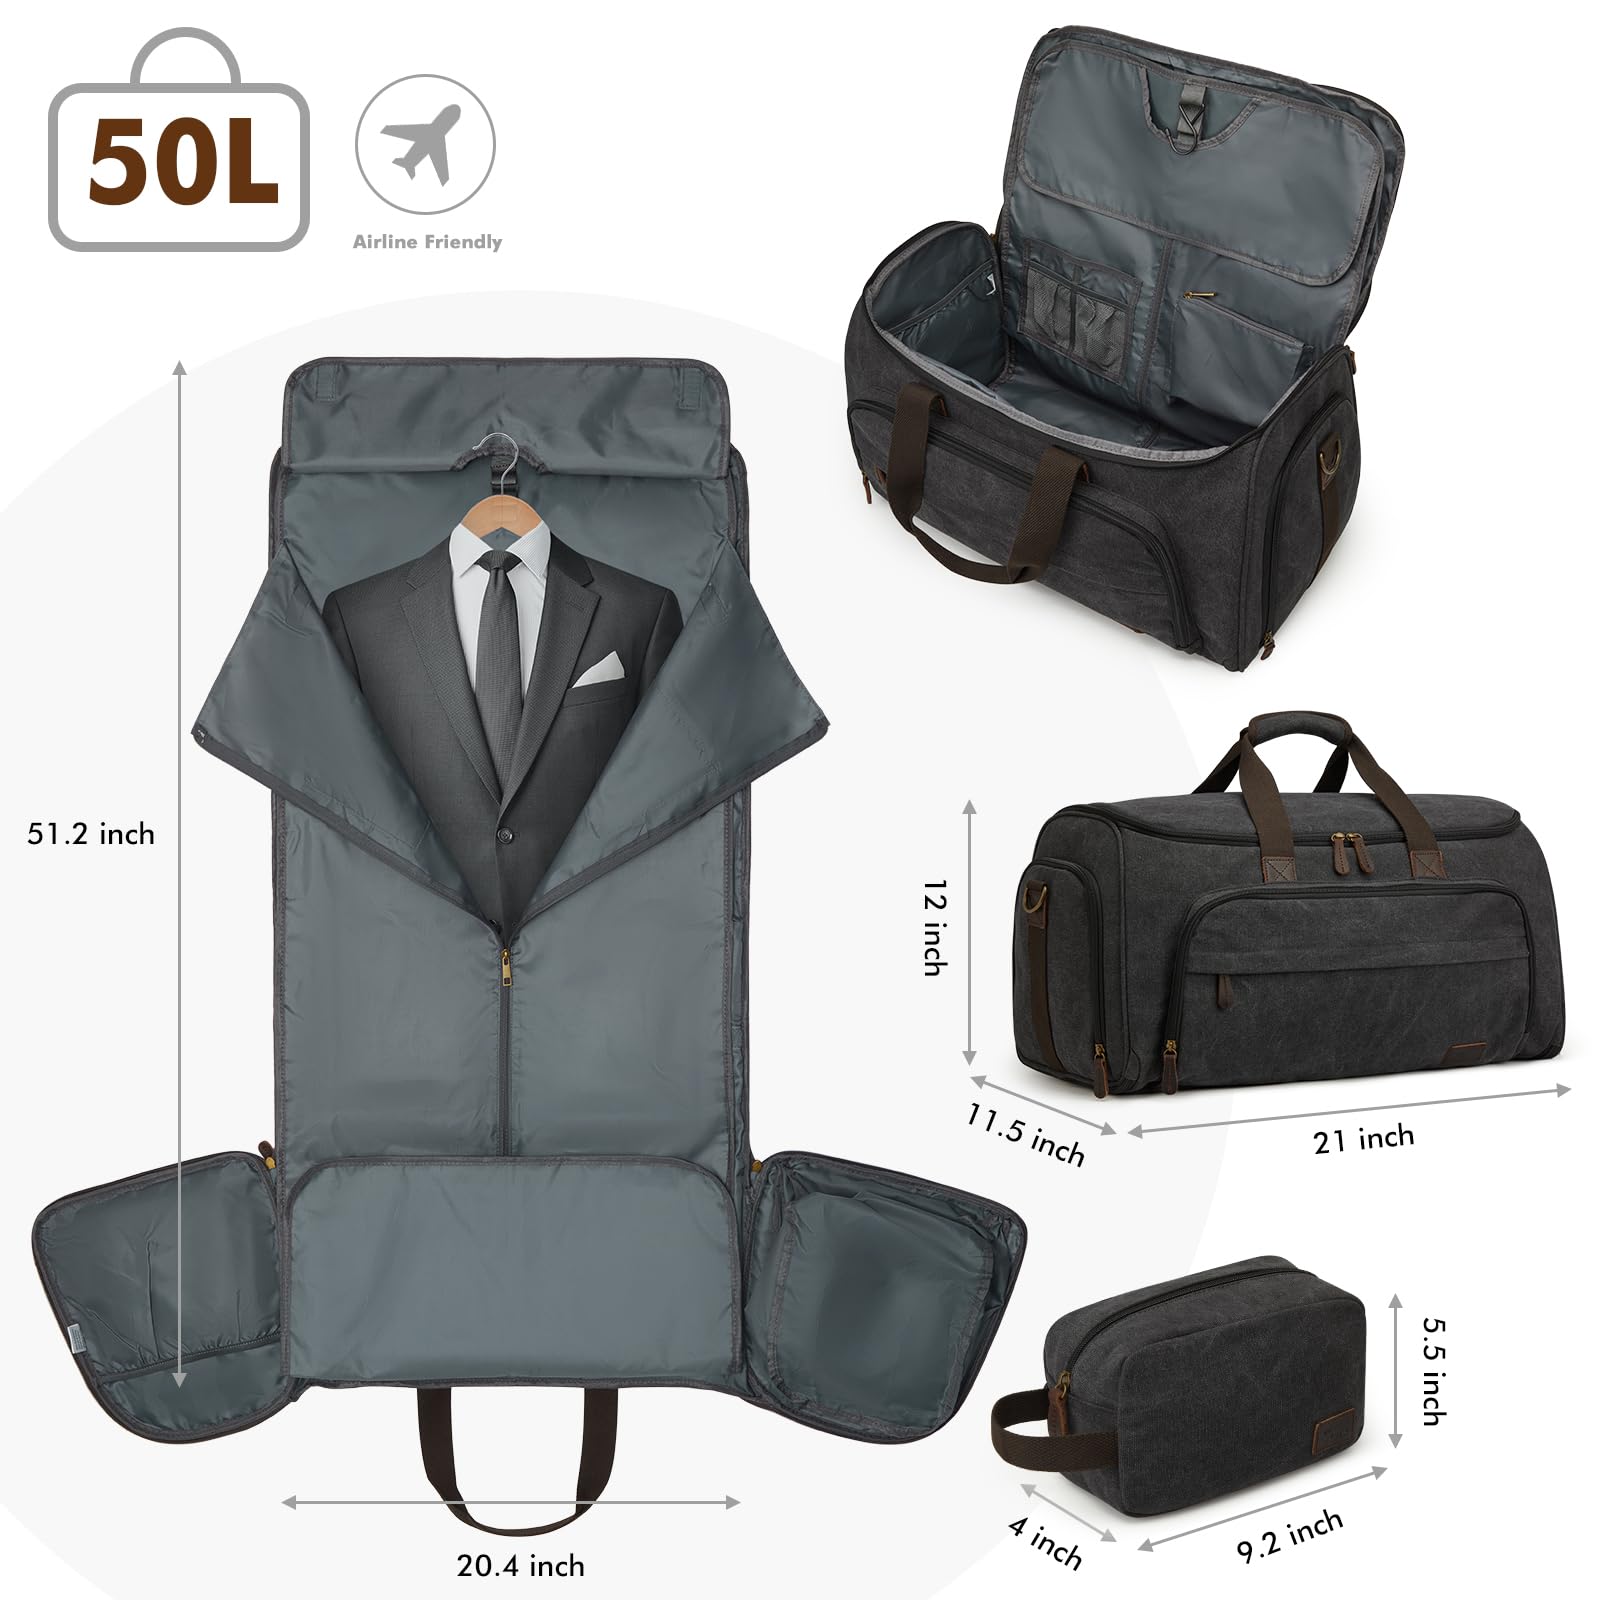 50L All-In-One Garment Travel Bag